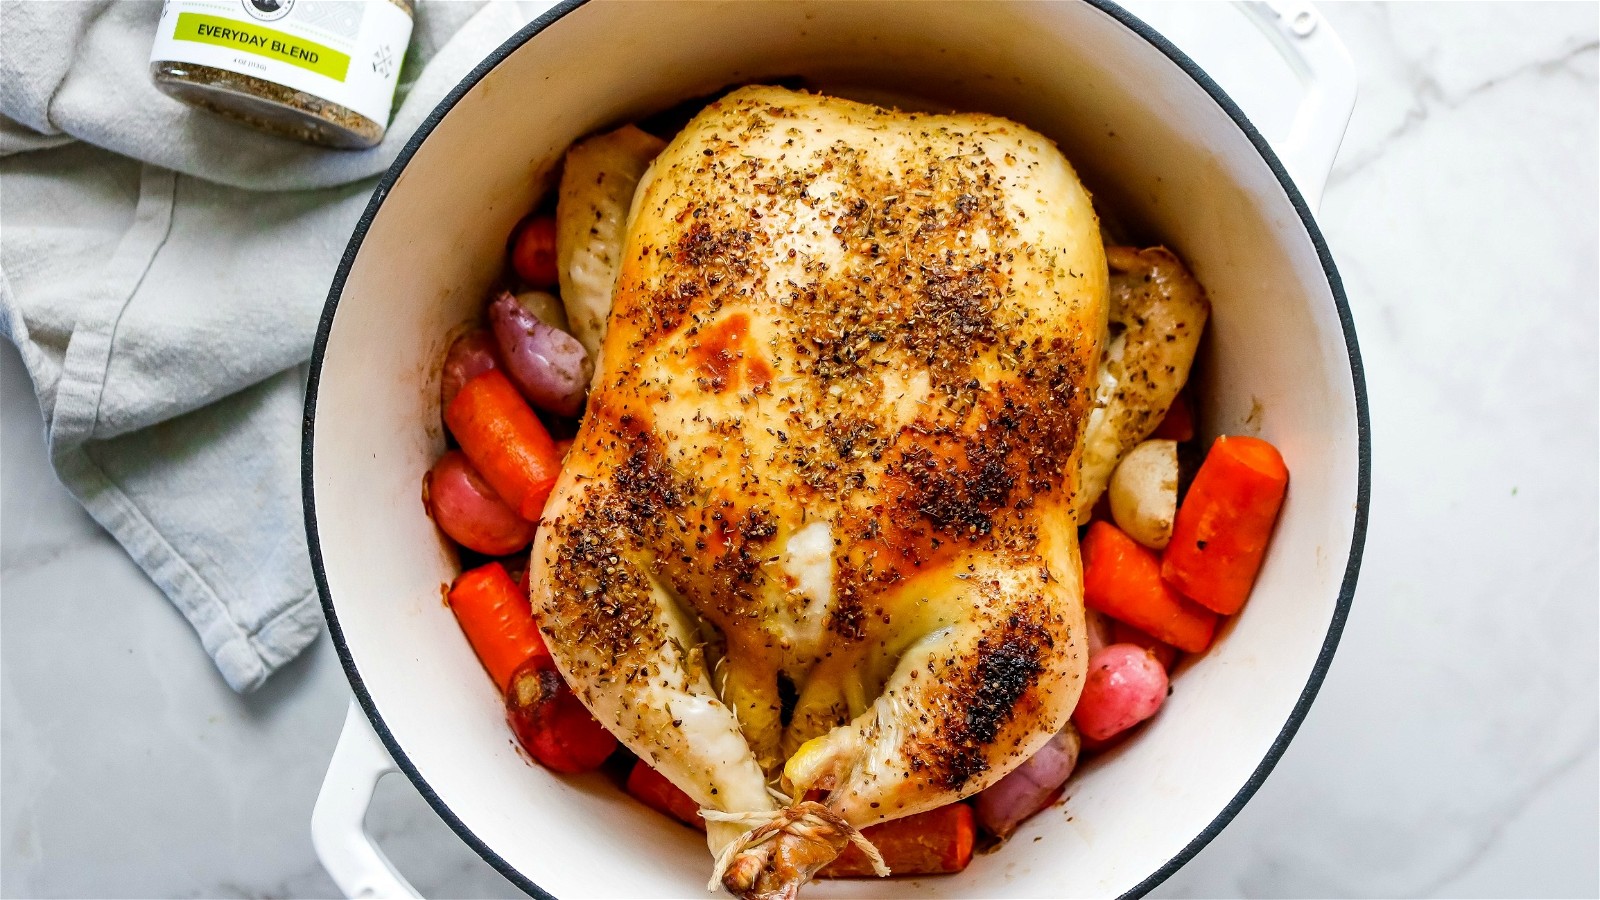 Image of EVERYDAY BLEND WHOLE ROASTED CHICKEN